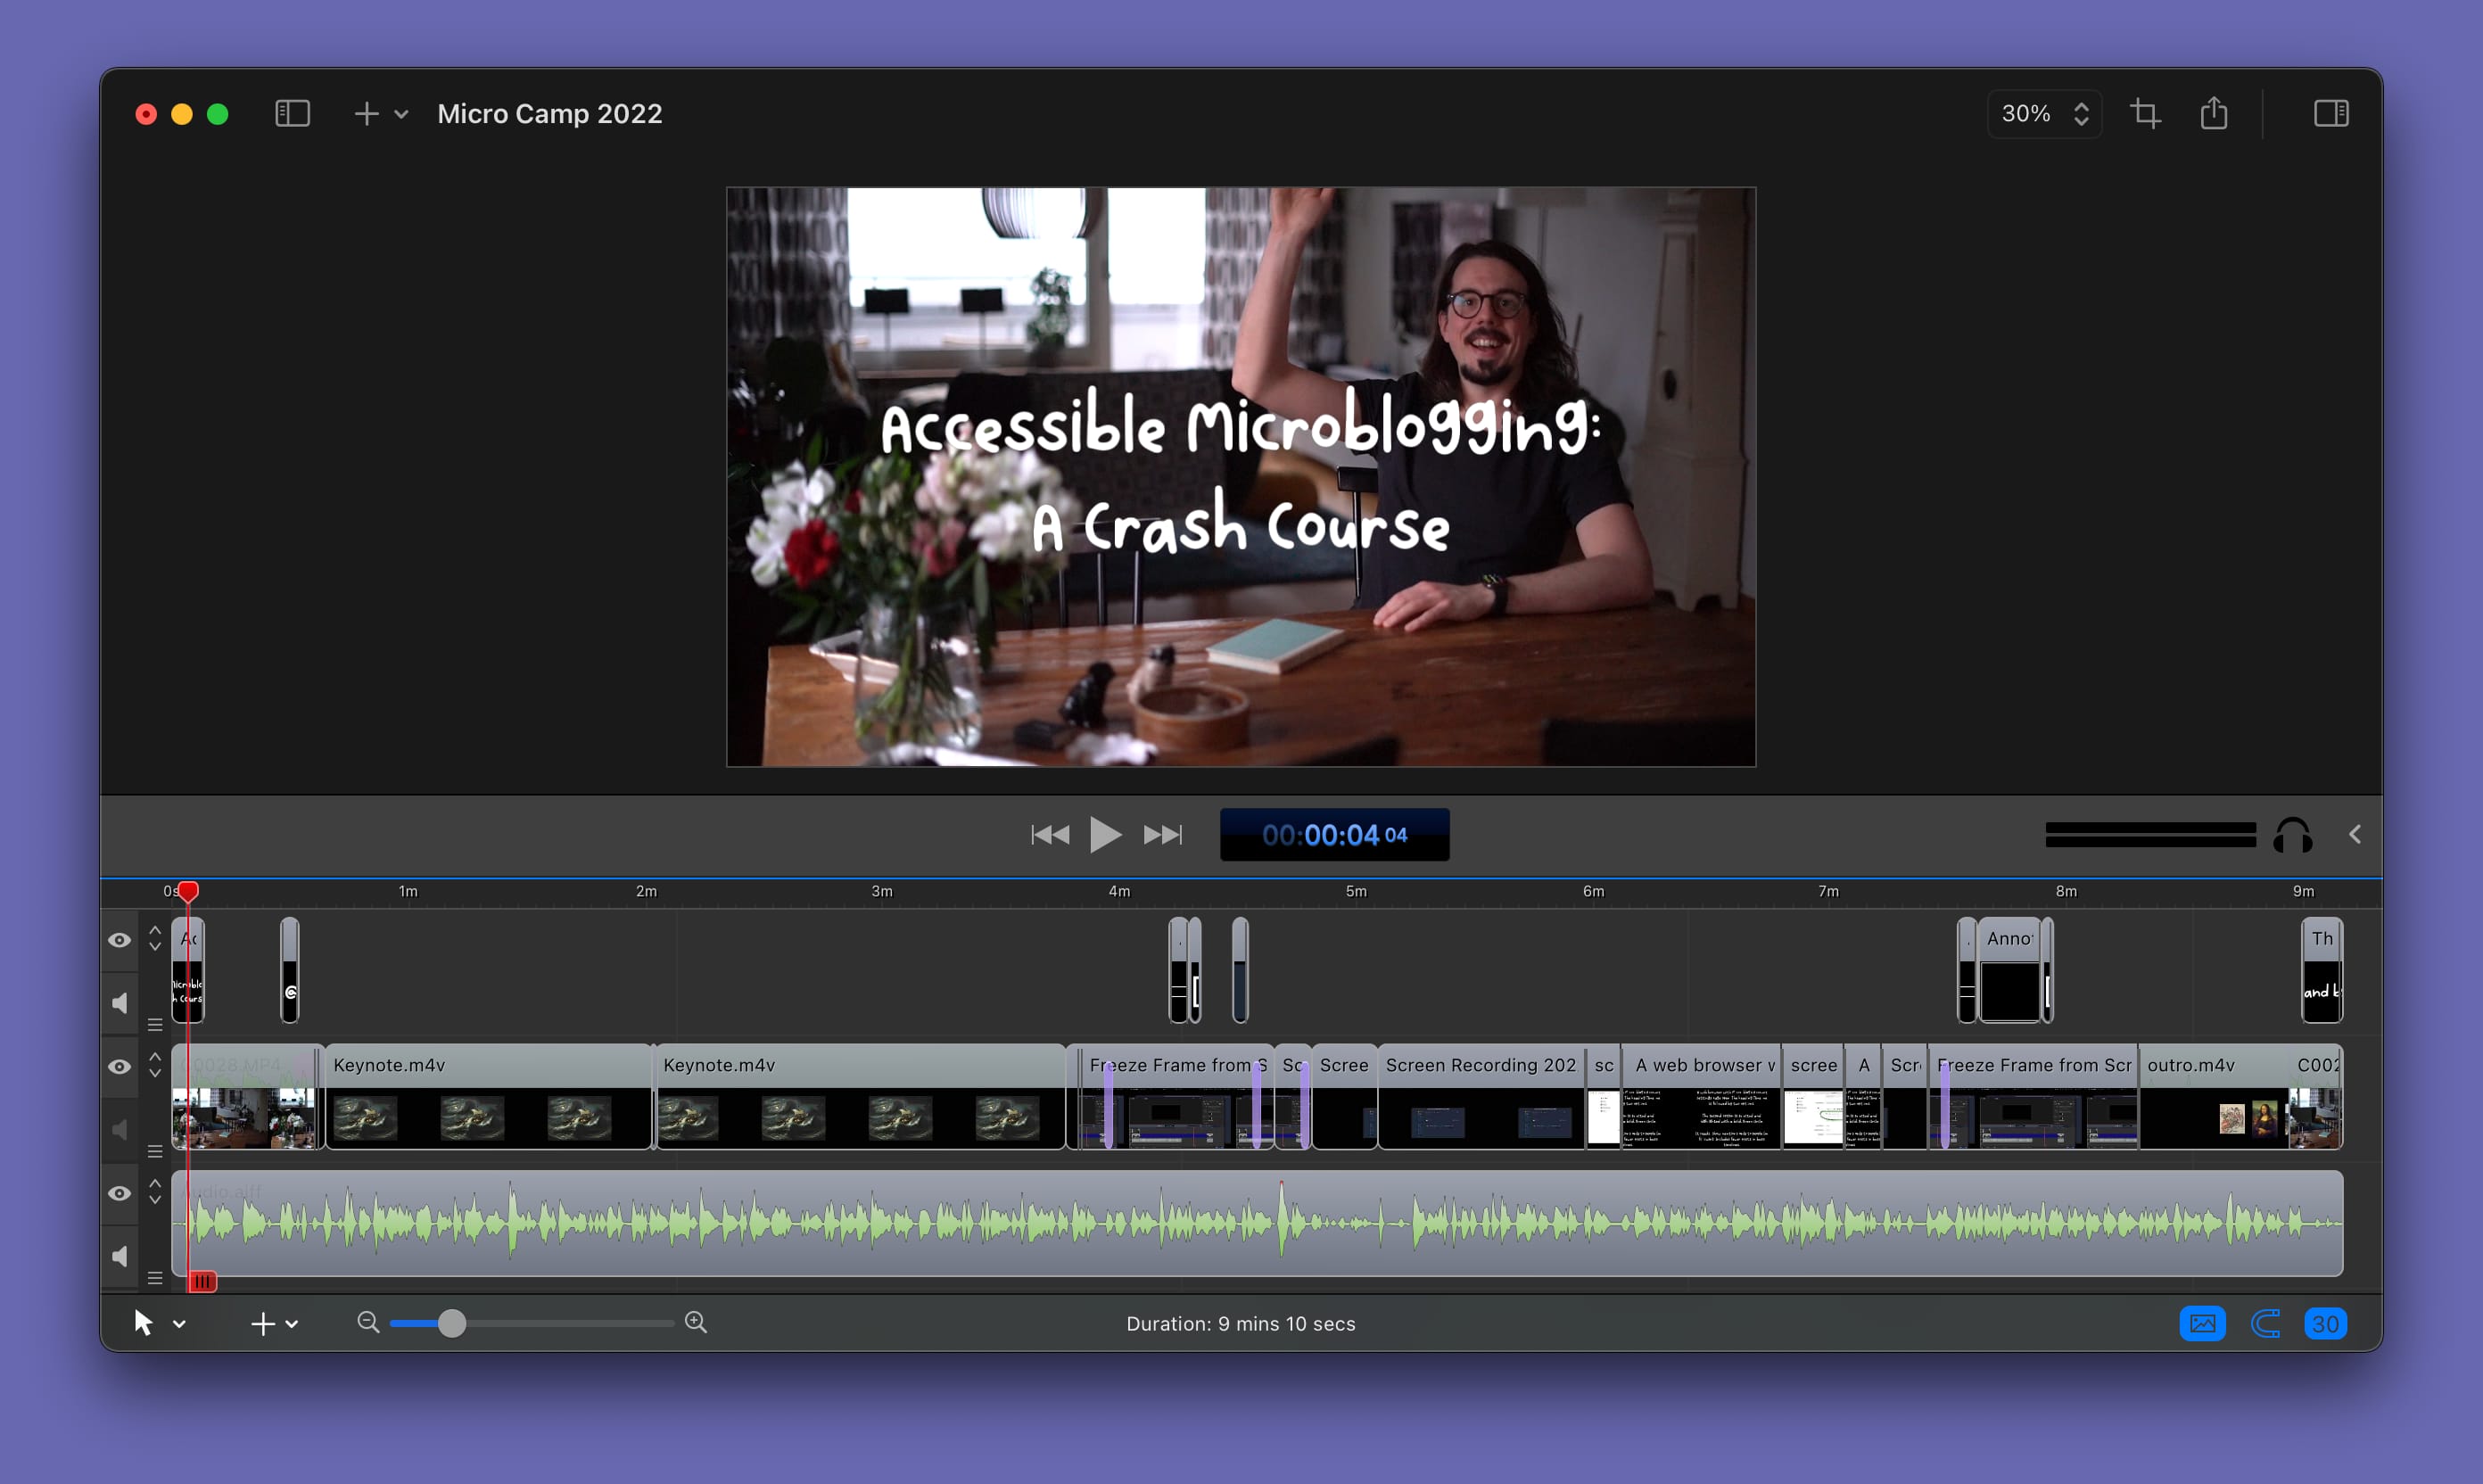 Video editing software with an open project named Micro Camp 2022. The scrubber is set to around 4 seconds, and the video preview shows a happy guy sitting at a table raising his hand in a salutation. The title is set in a playful font and reads Accessible Microblogging: A Crash Course.